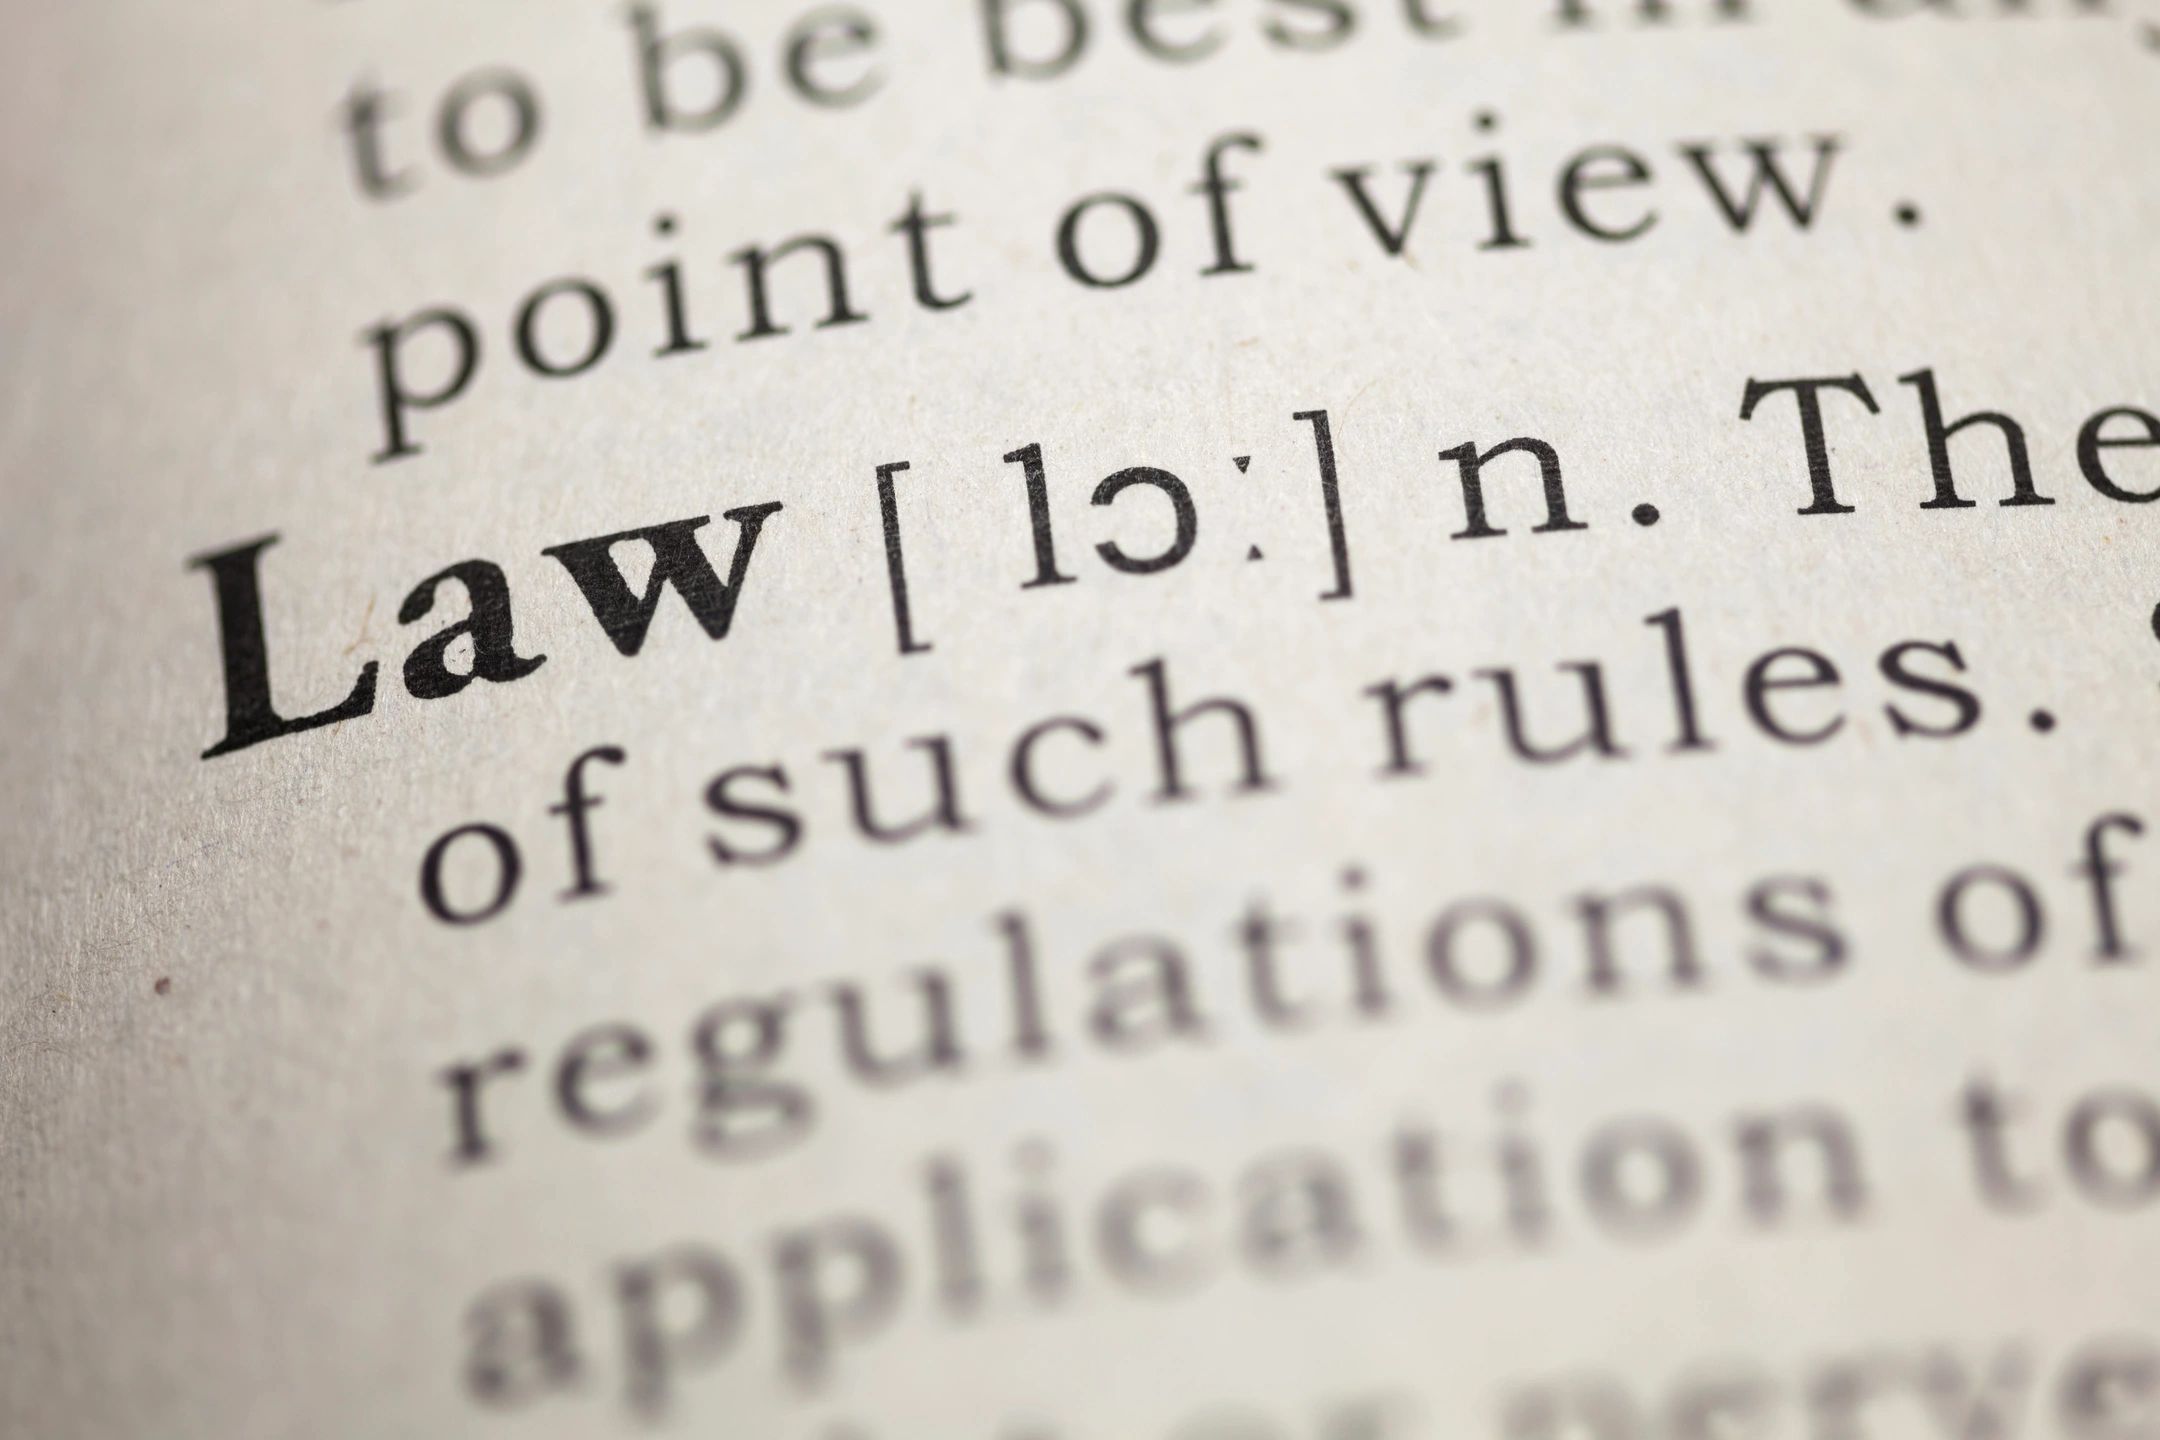 image of dictionary definition of "law"